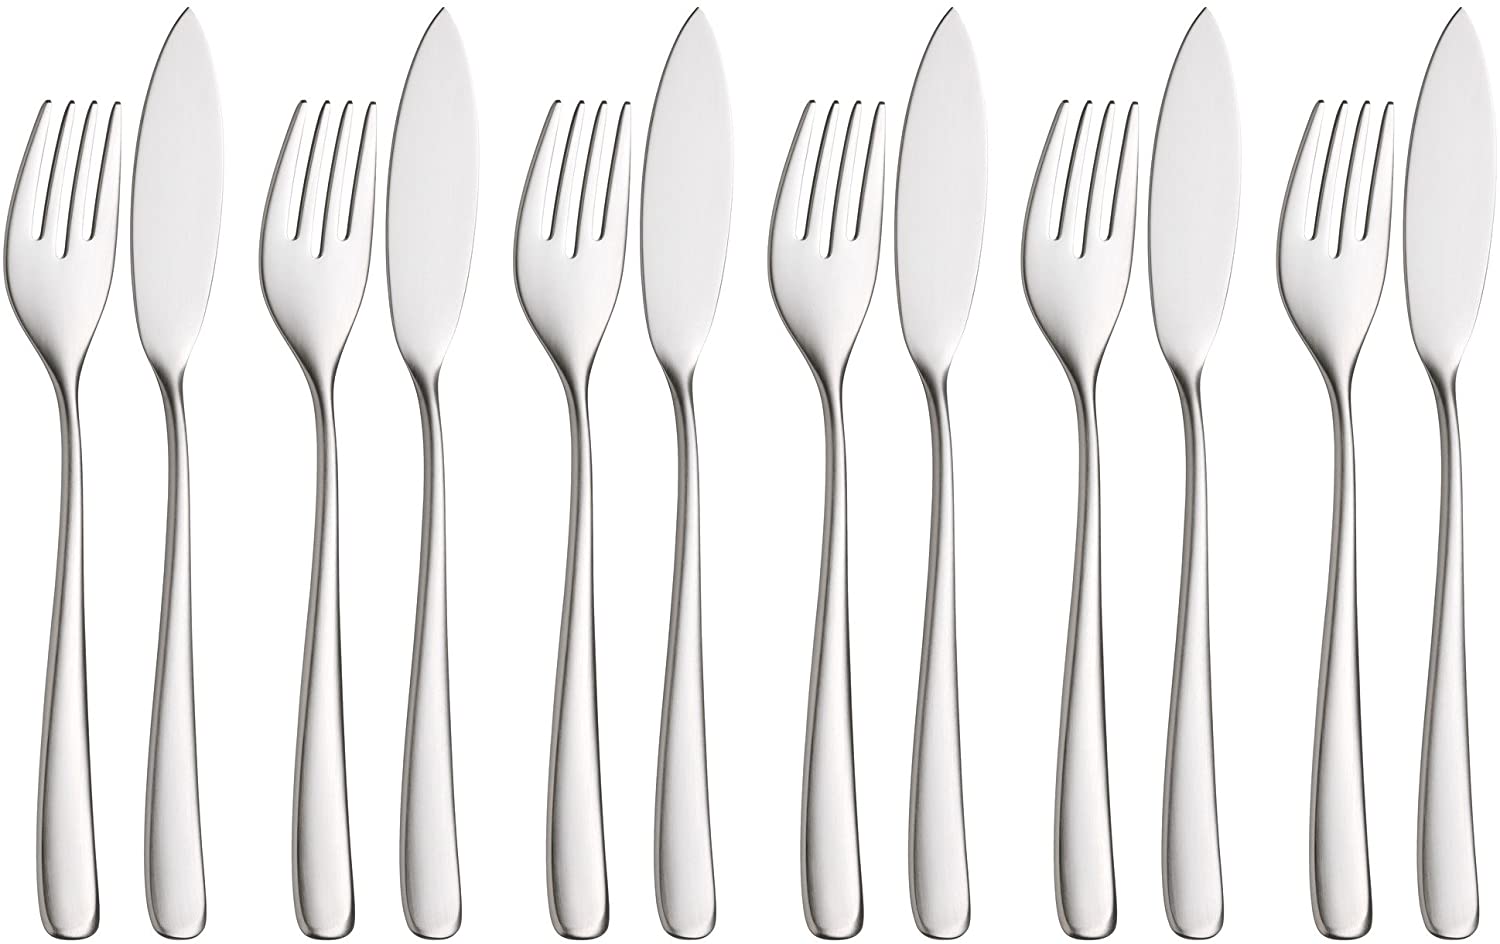 WMF Vision 1271356336 Fish Cutlery Set Cromargan Protect Stainless Steel 12 Pieces